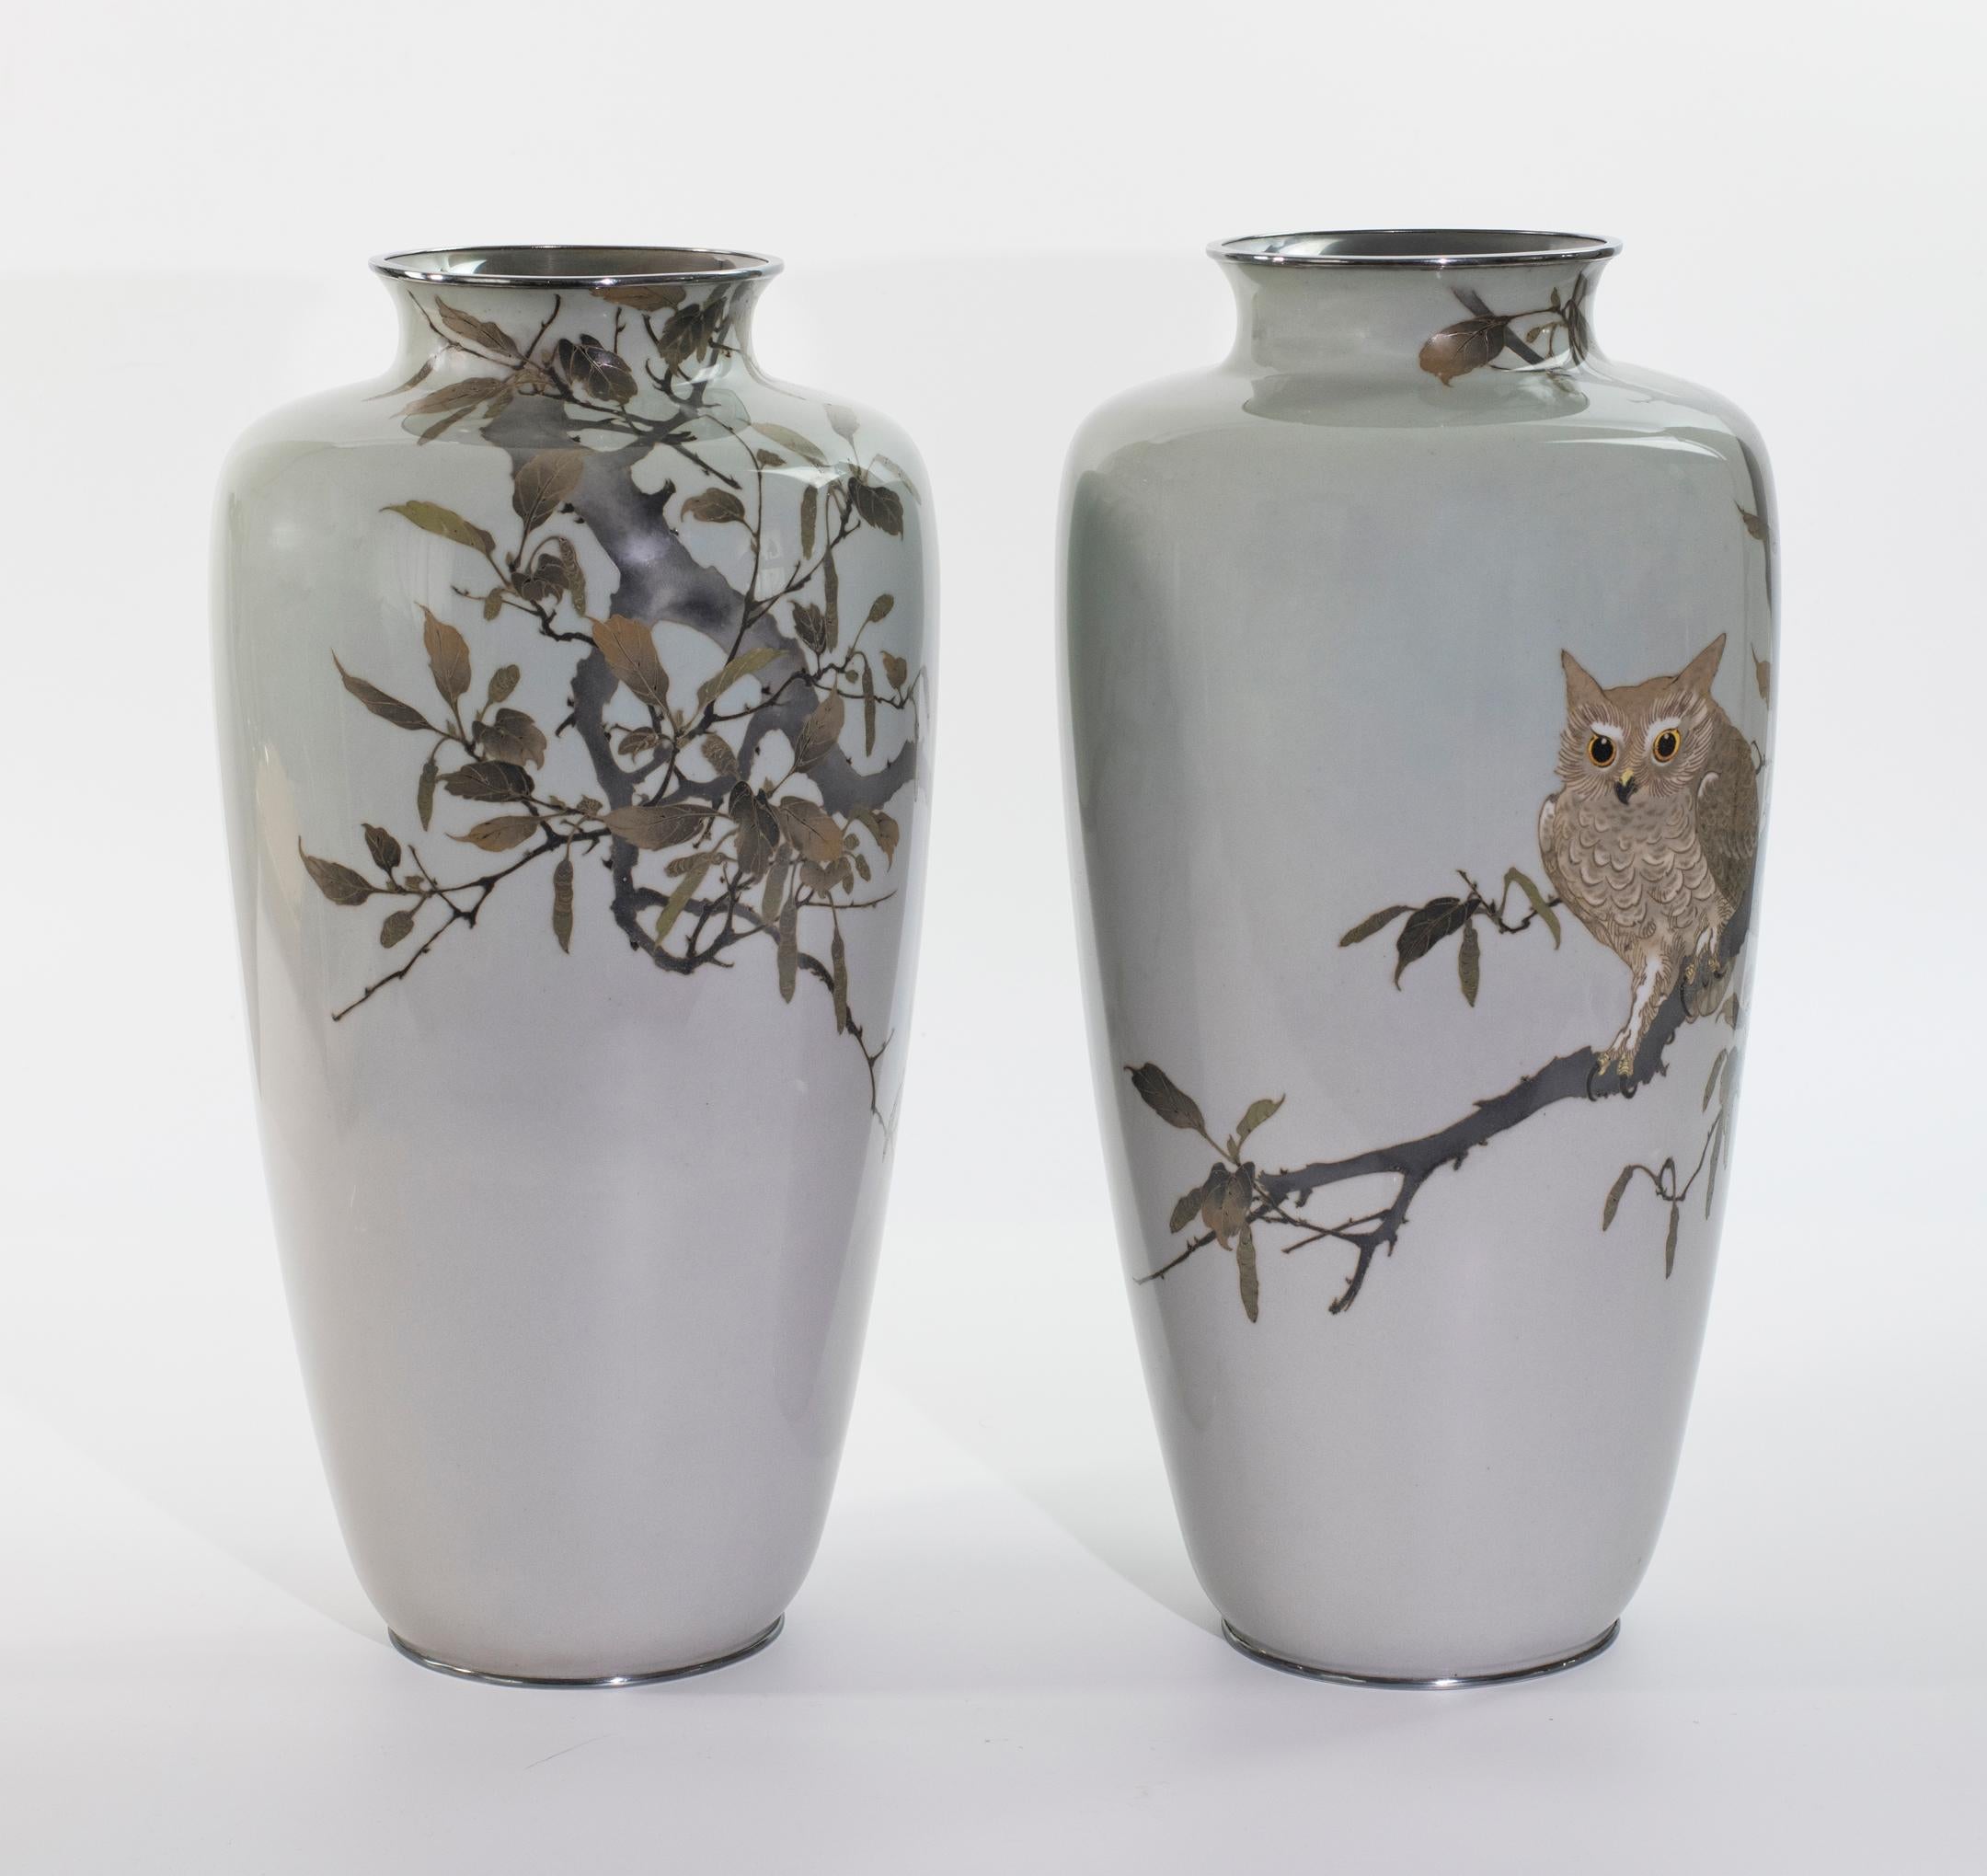 As part of our Japanese works of art collection we are delighted to offer this large and most unusual pair of Meiji Period 1868-1912 , circa 1900, cloisonne enamel vases by the highly regarded Ando company, this most unusual pair of vases depict an